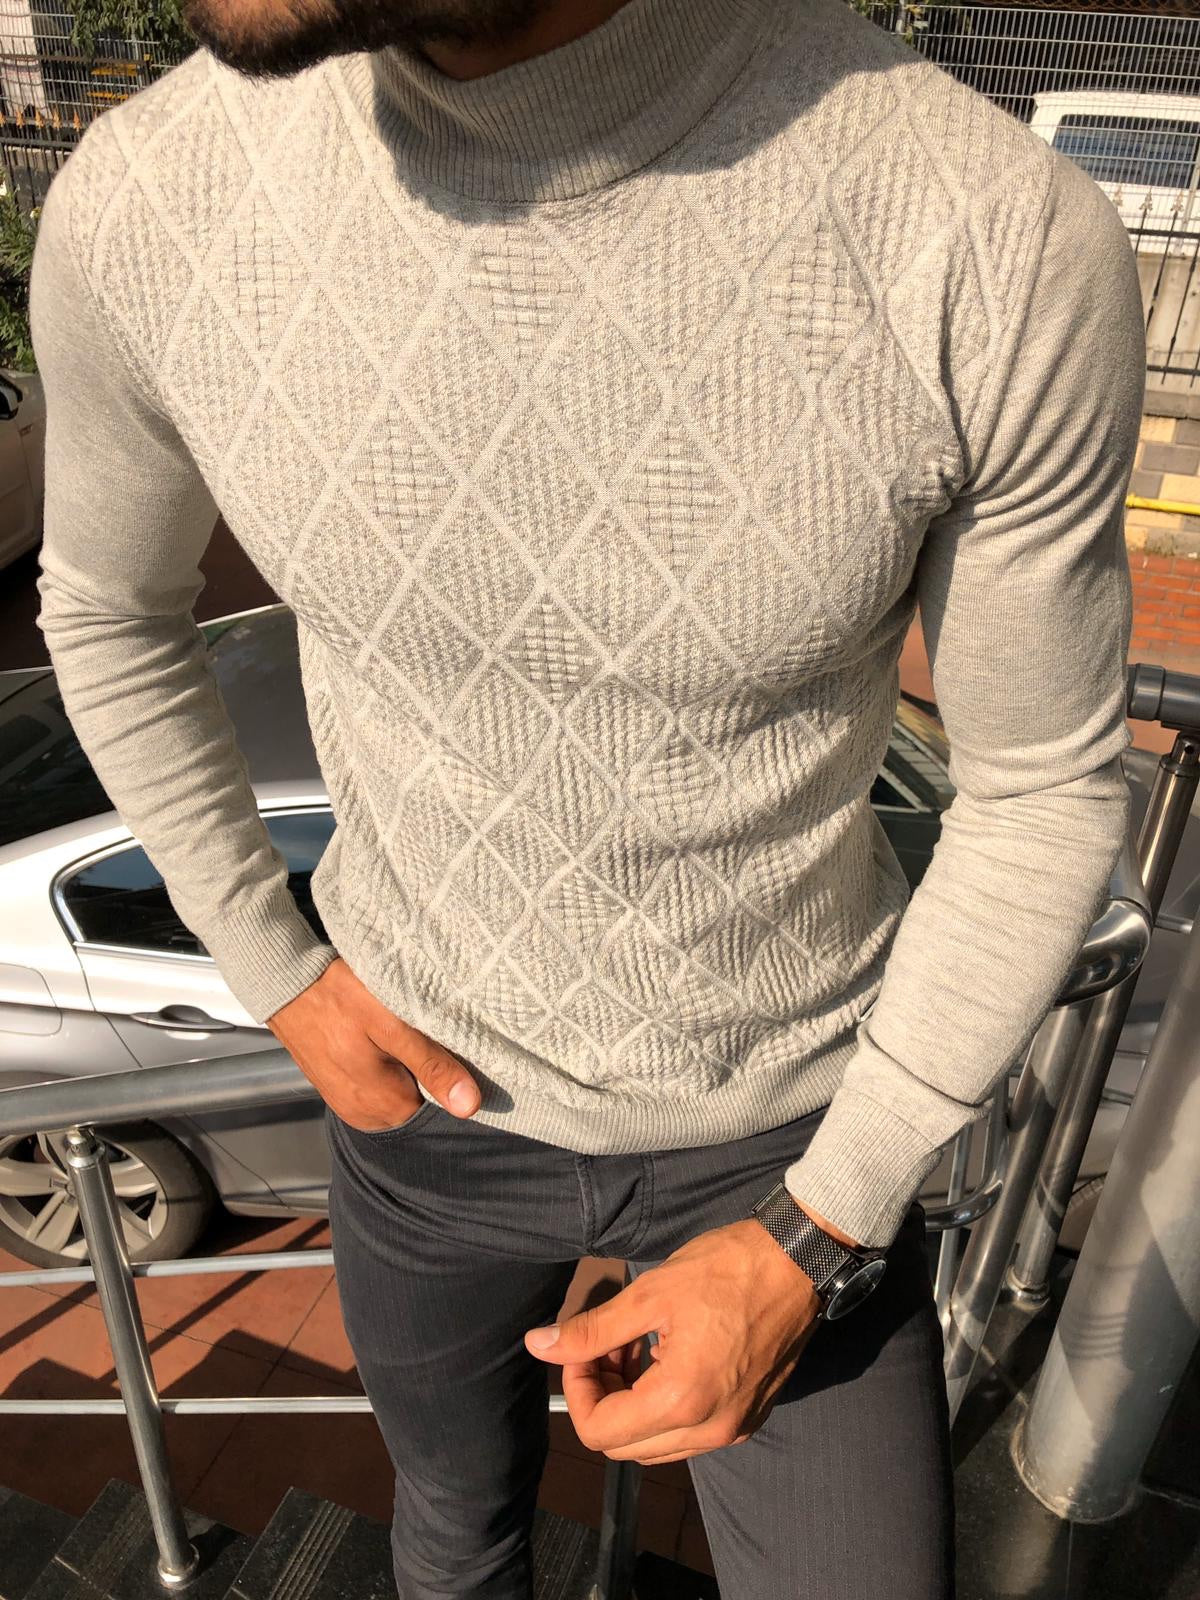 White Slim Fit Mock Turtleneck Sweater by